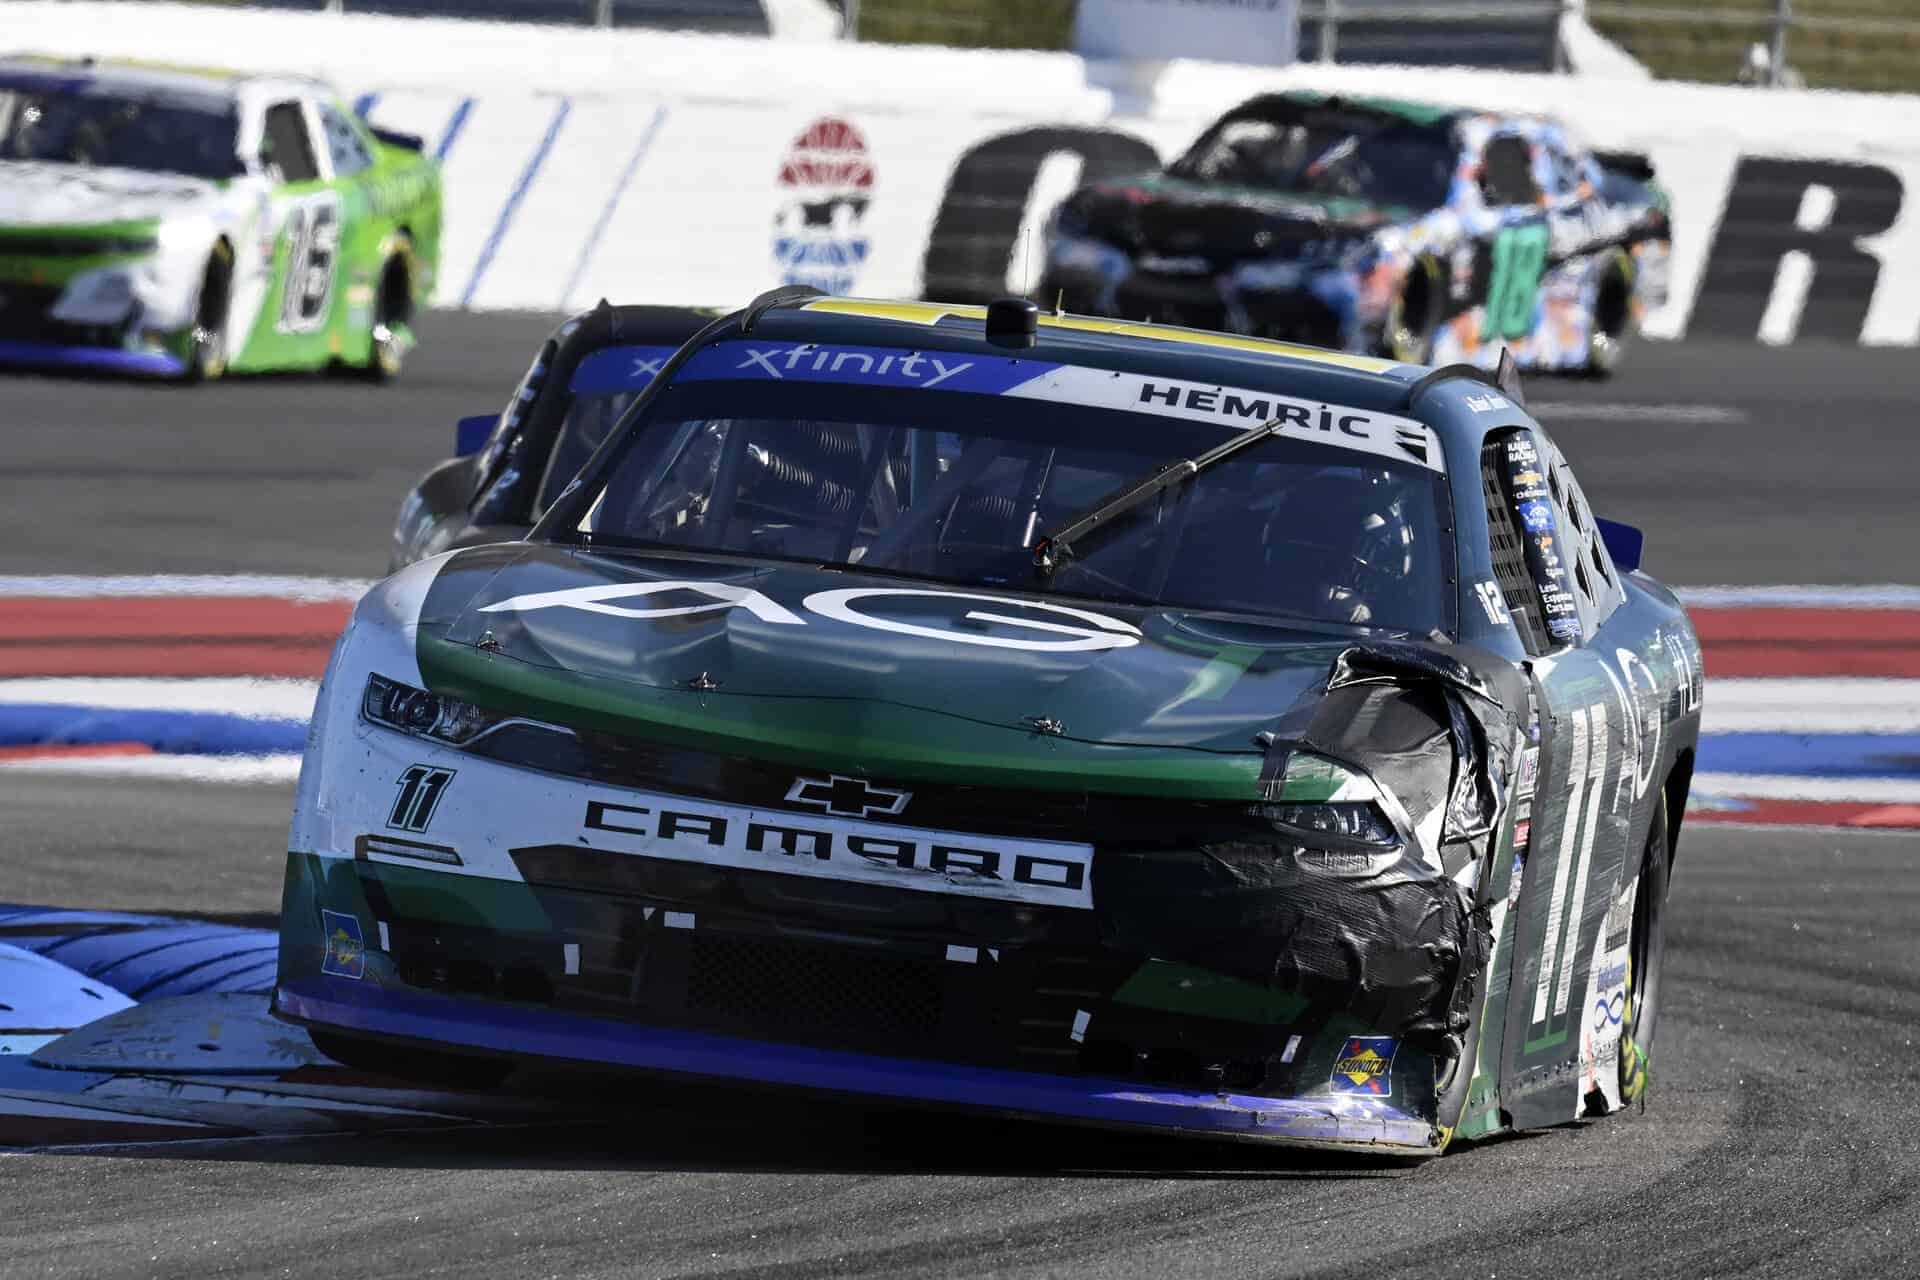 Daniel hemric charges through the field after early race damage, but fell short of advancing into the round of 8 in the nascar xfinity series playoffs. Photo by nigel kinrade photography.